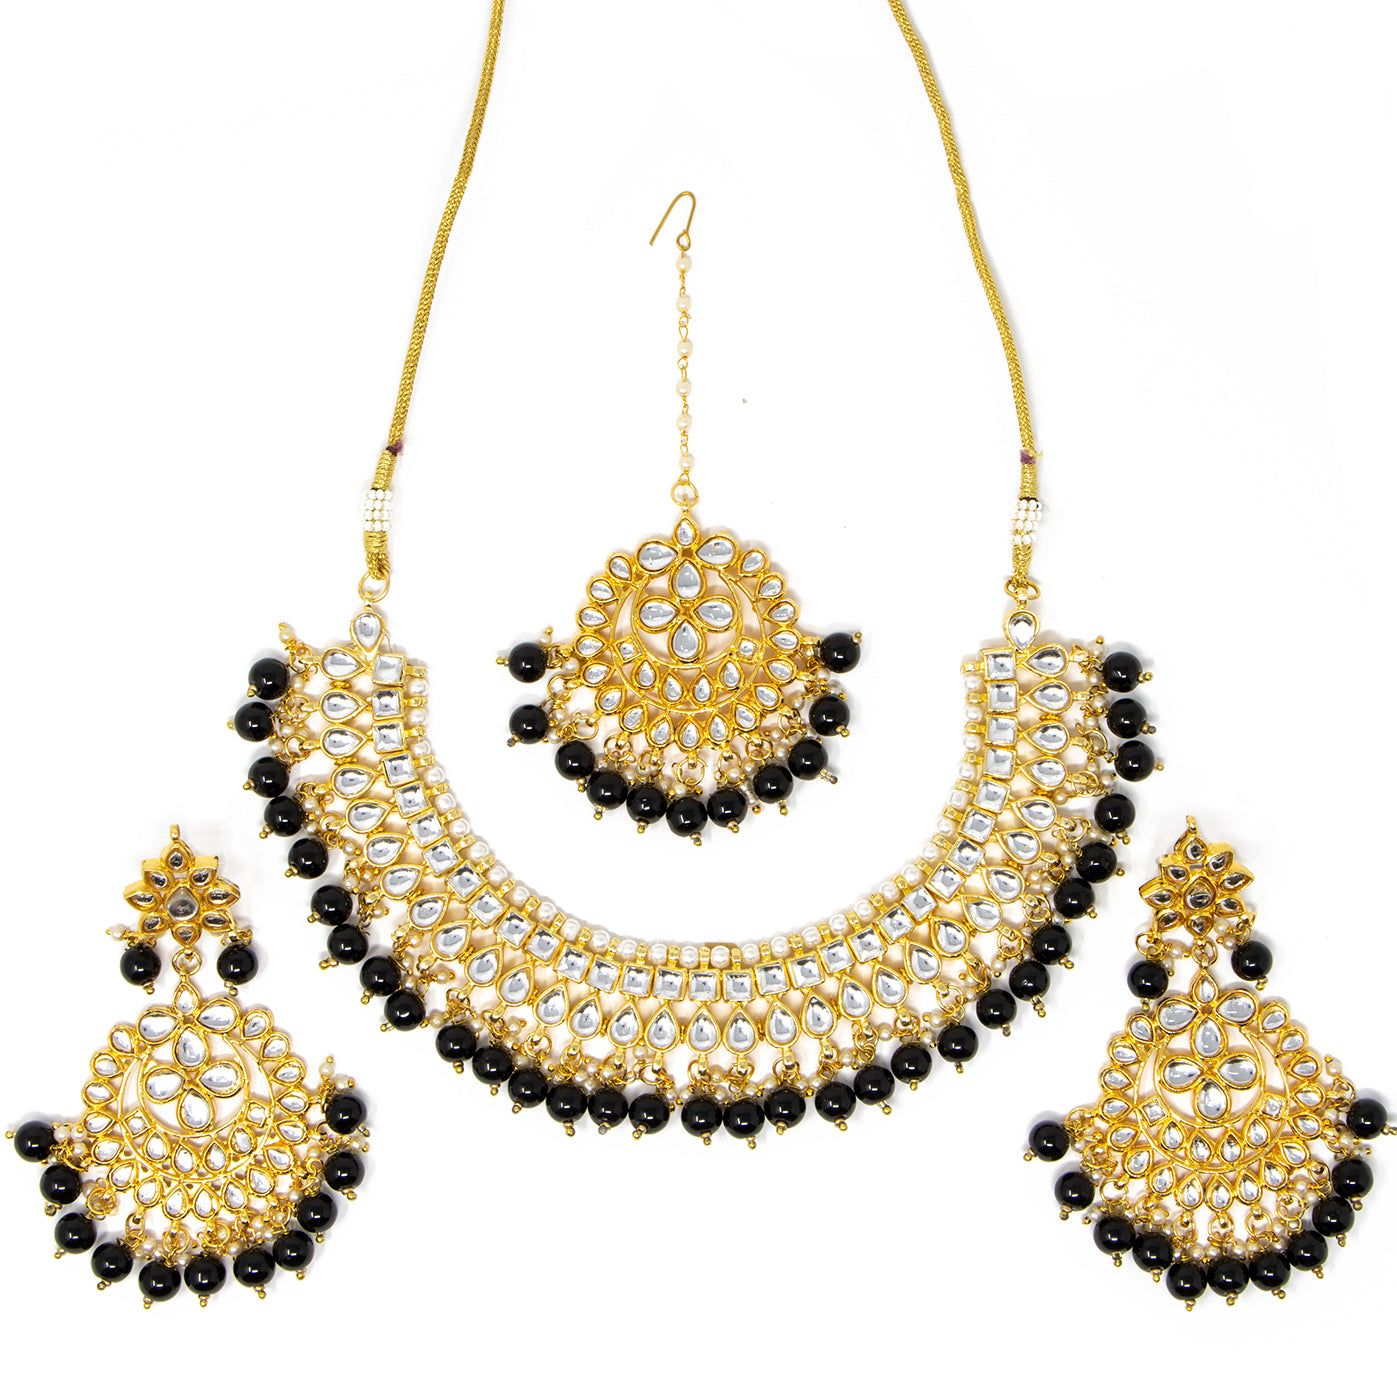 Black, Gold, Silver 3 piece Necklace with earrings and bindi